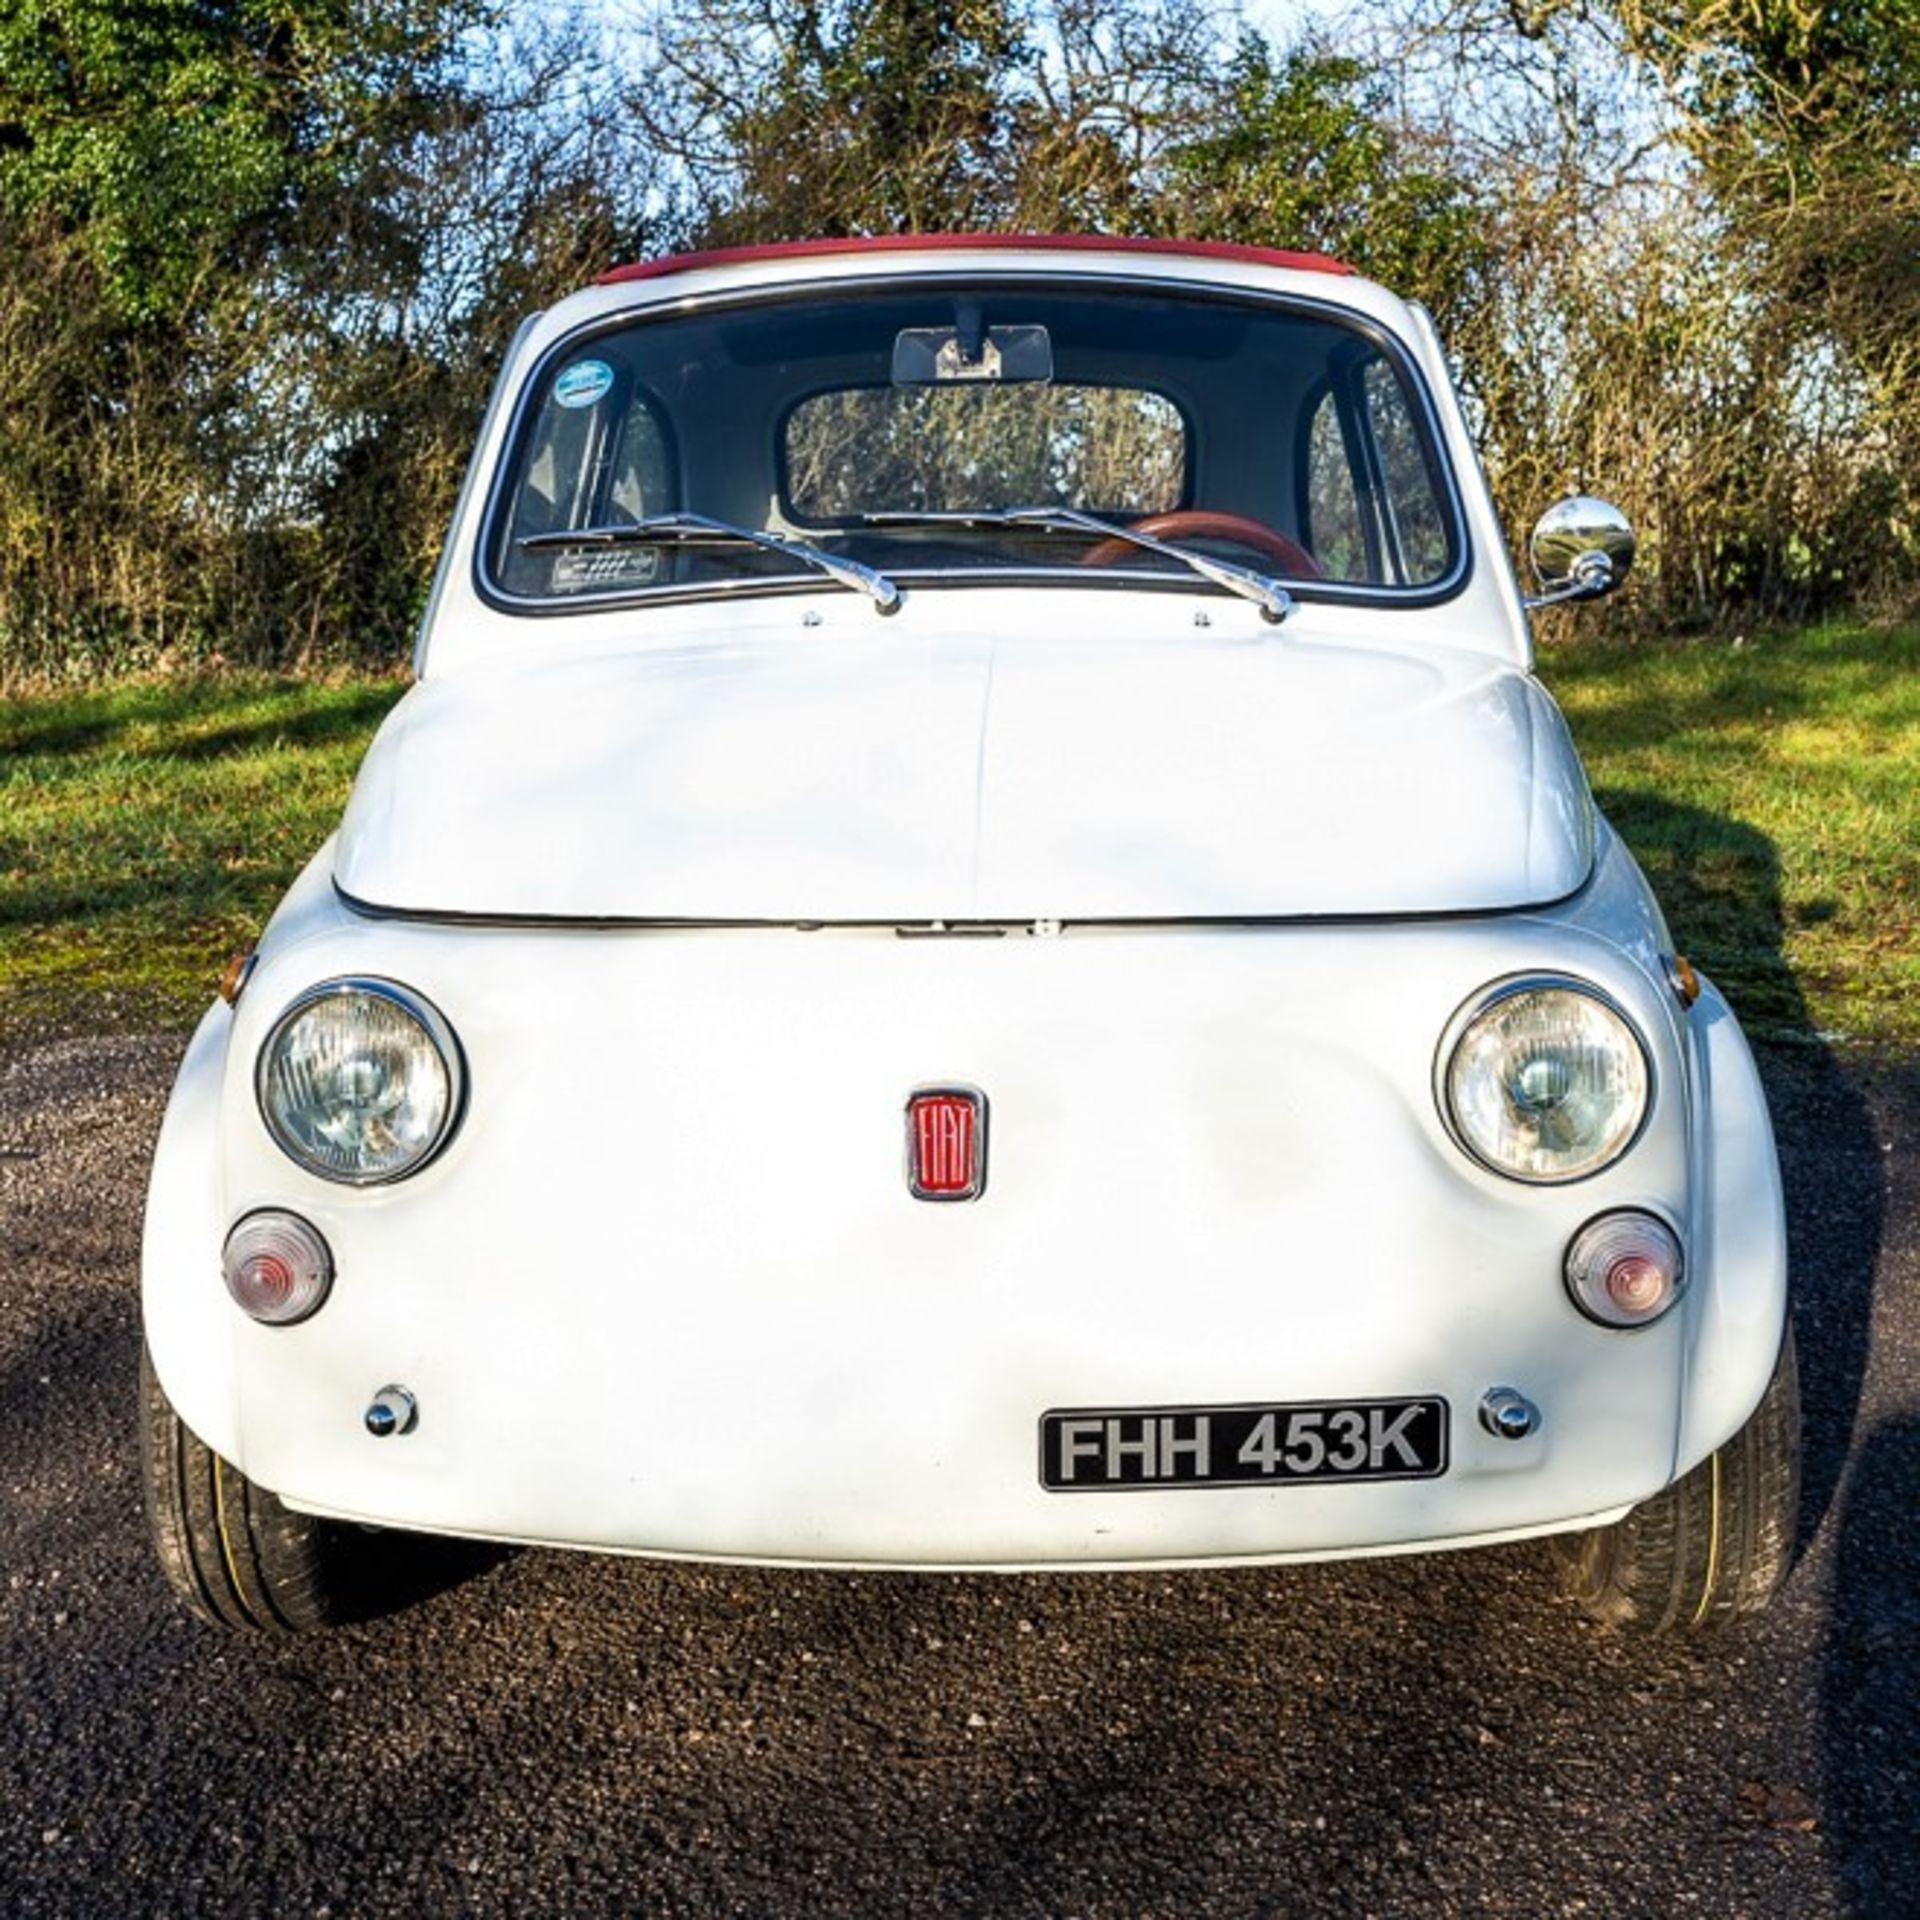 1972 FIAT 500 ABARTH TRIBUTE Registration Number: FHH 453K             Chassis Number: TBA - Image 4 of 16